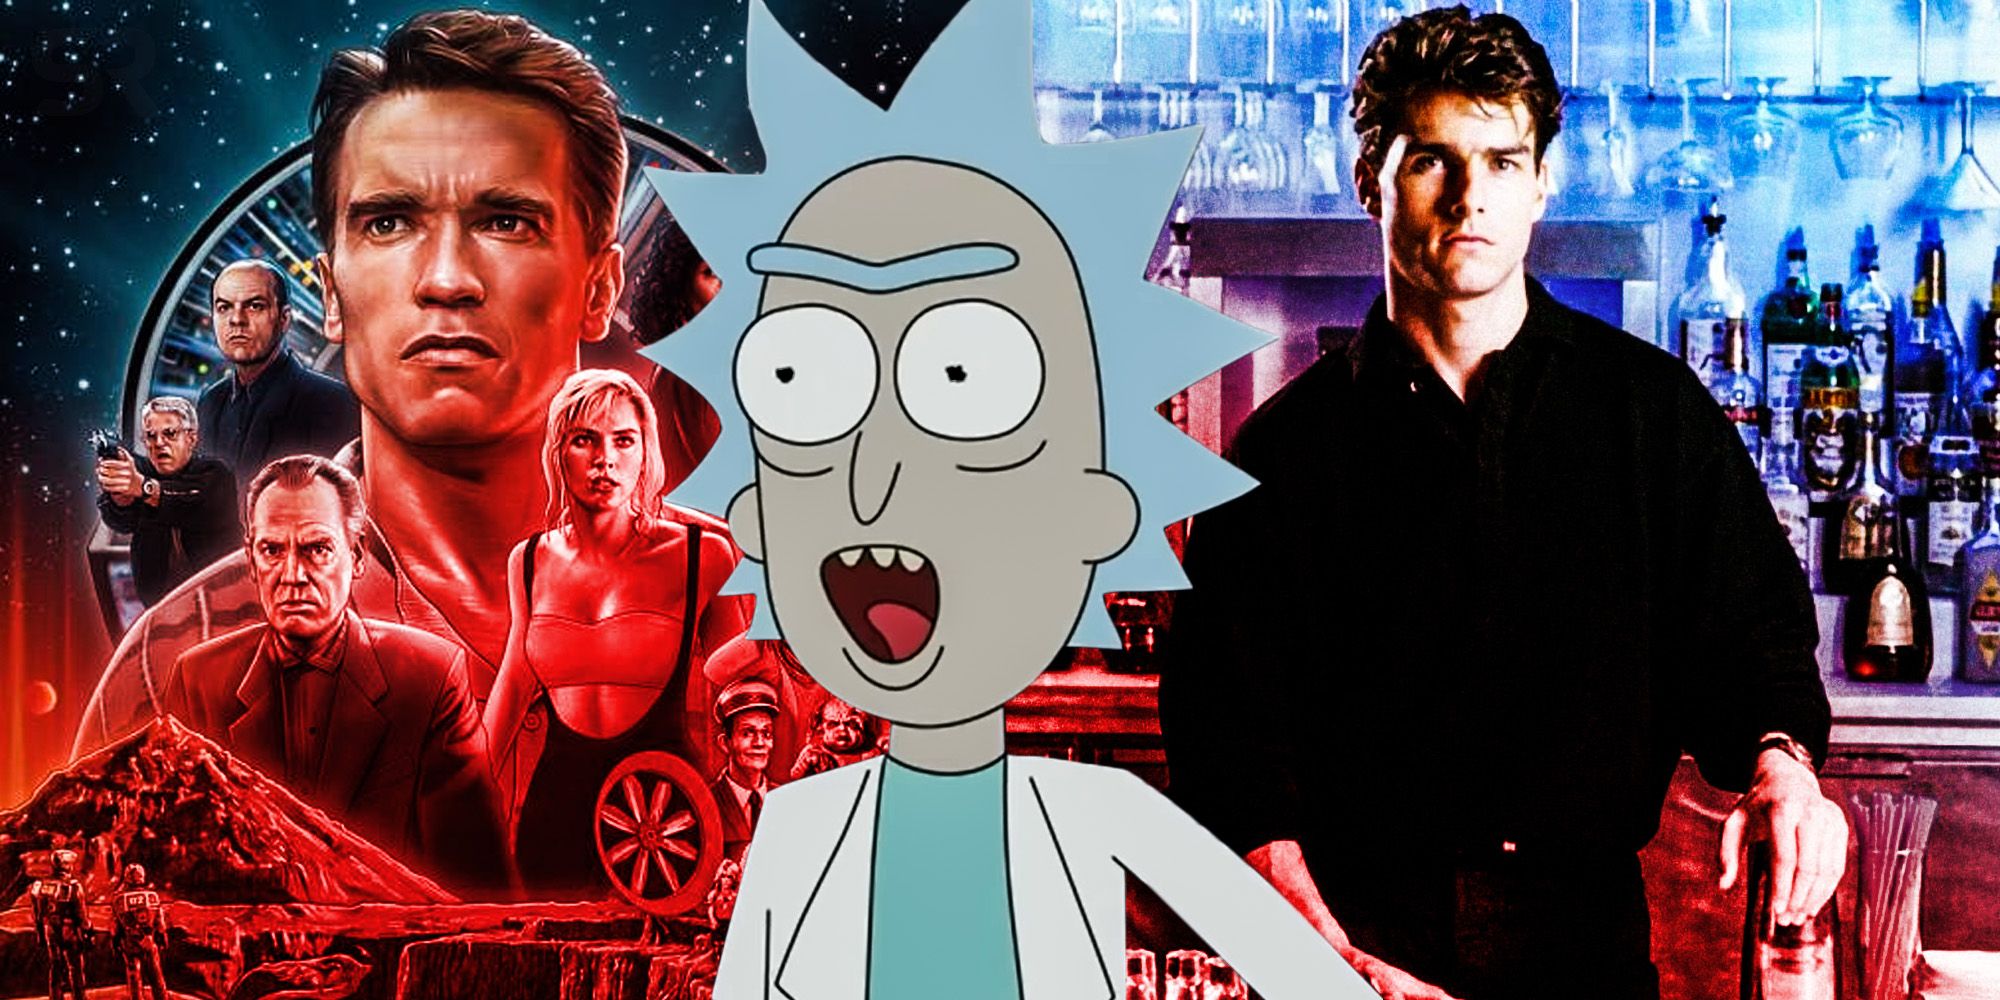 Rick and morty Cocktail Tom Cruise Total Recall